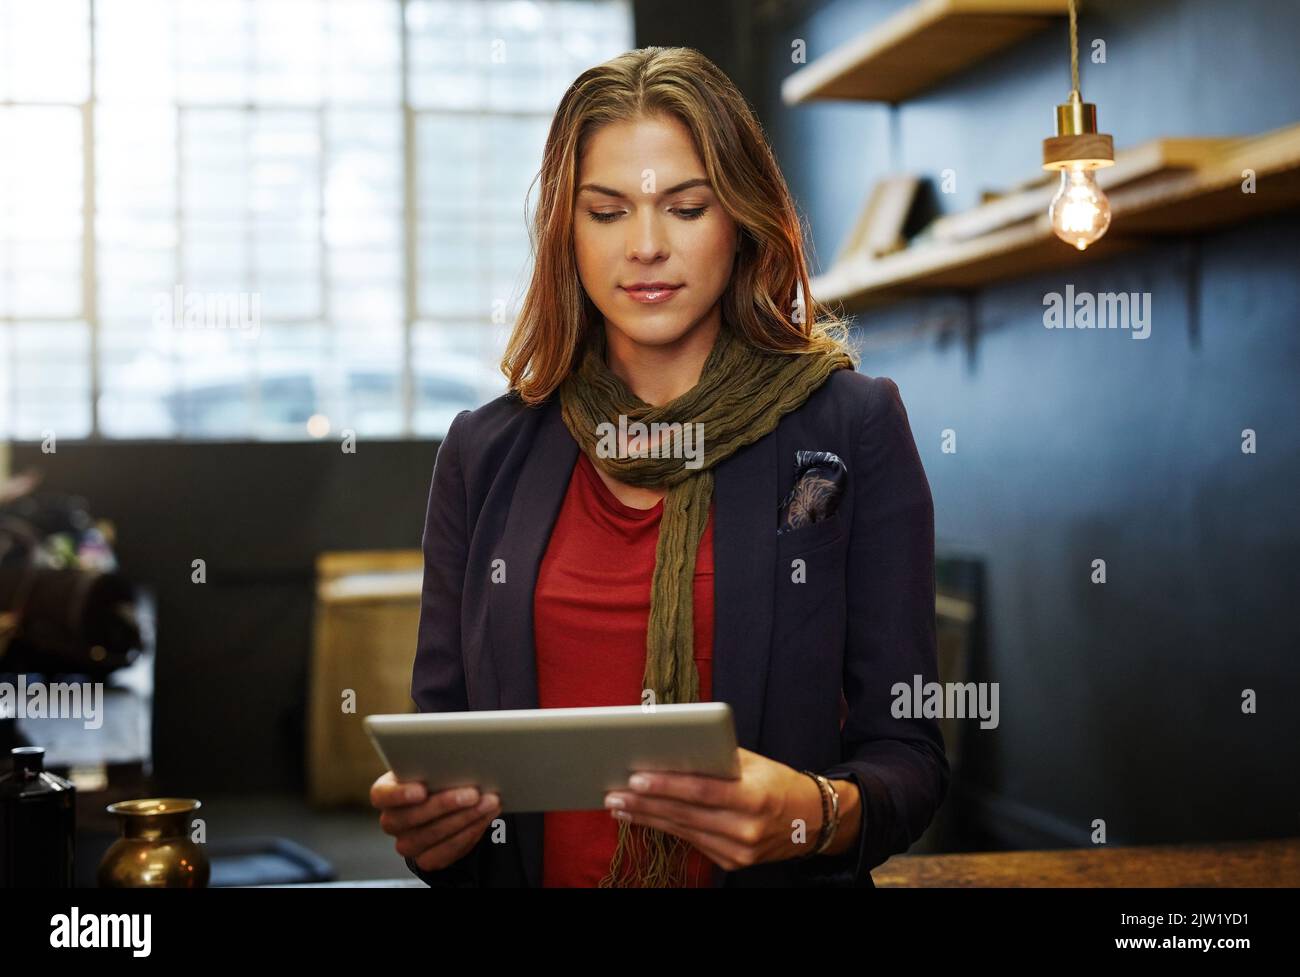 Just checking my diary for the day. a young business owner using a digital tablet in her shop. Stock Photo